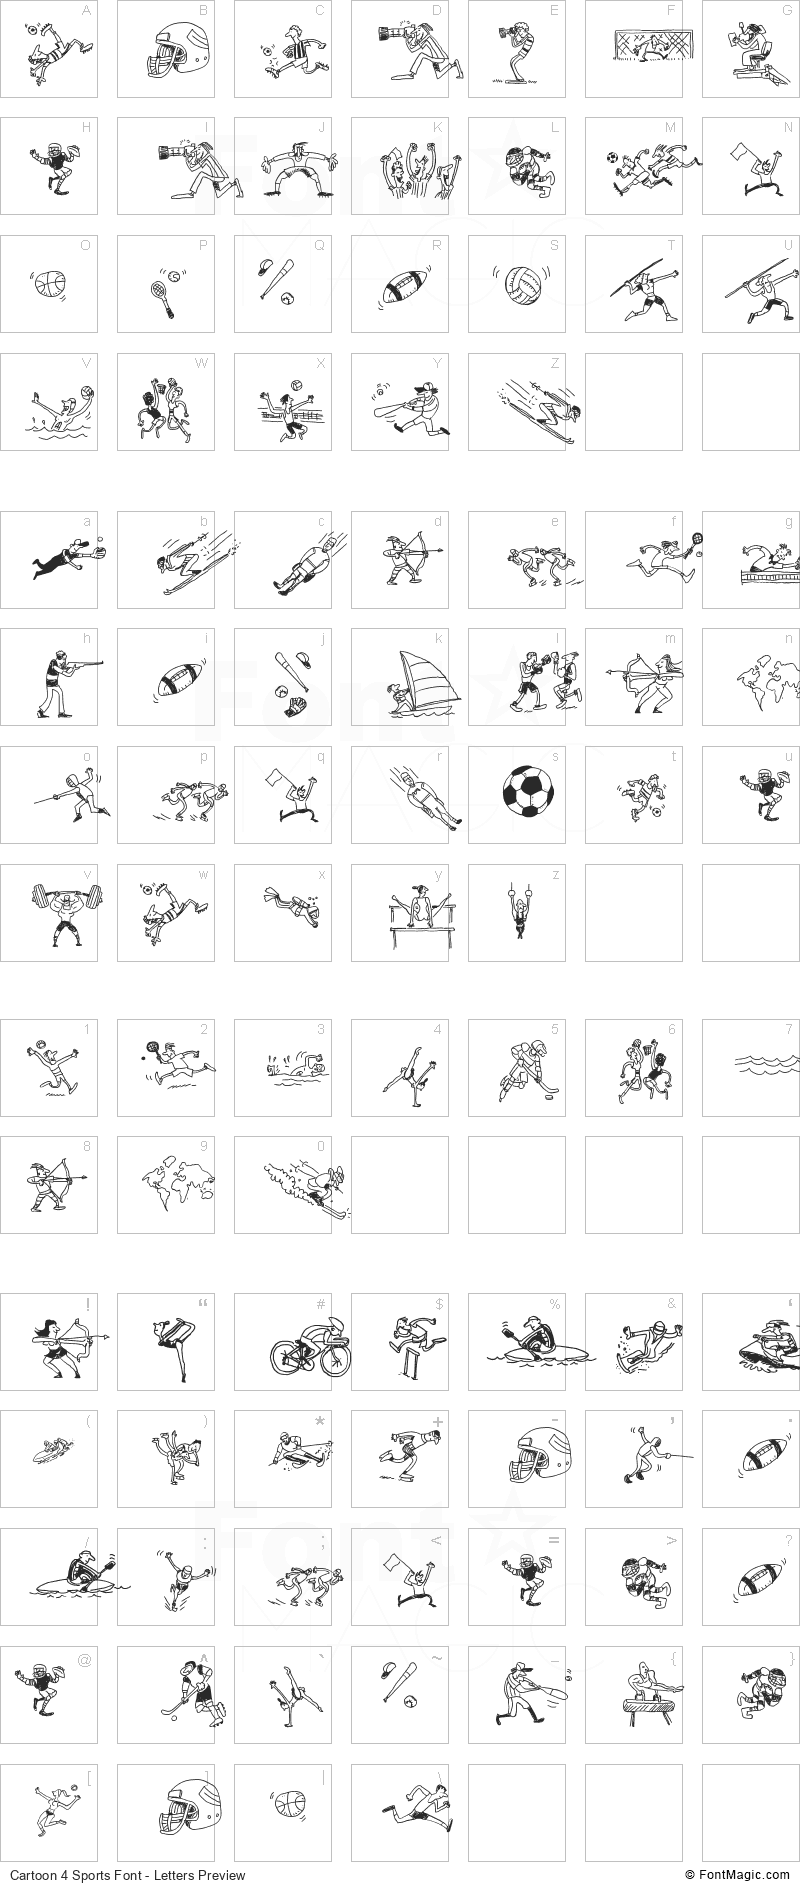 Cartoon 4 Sports Font - All Latters Preview Chart